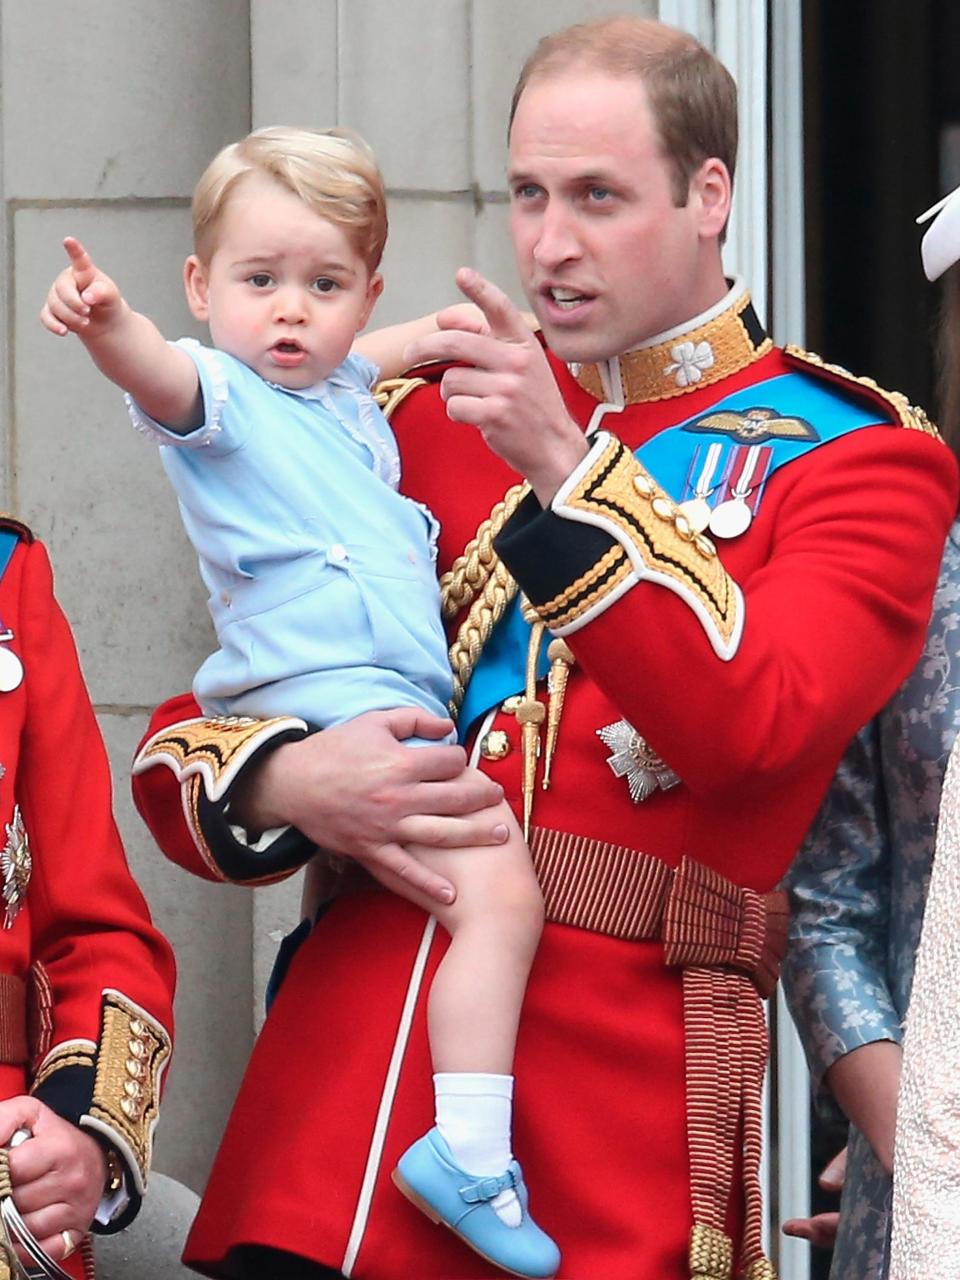 He looks just like his father Prince Charles, the Duke of Cambridge.